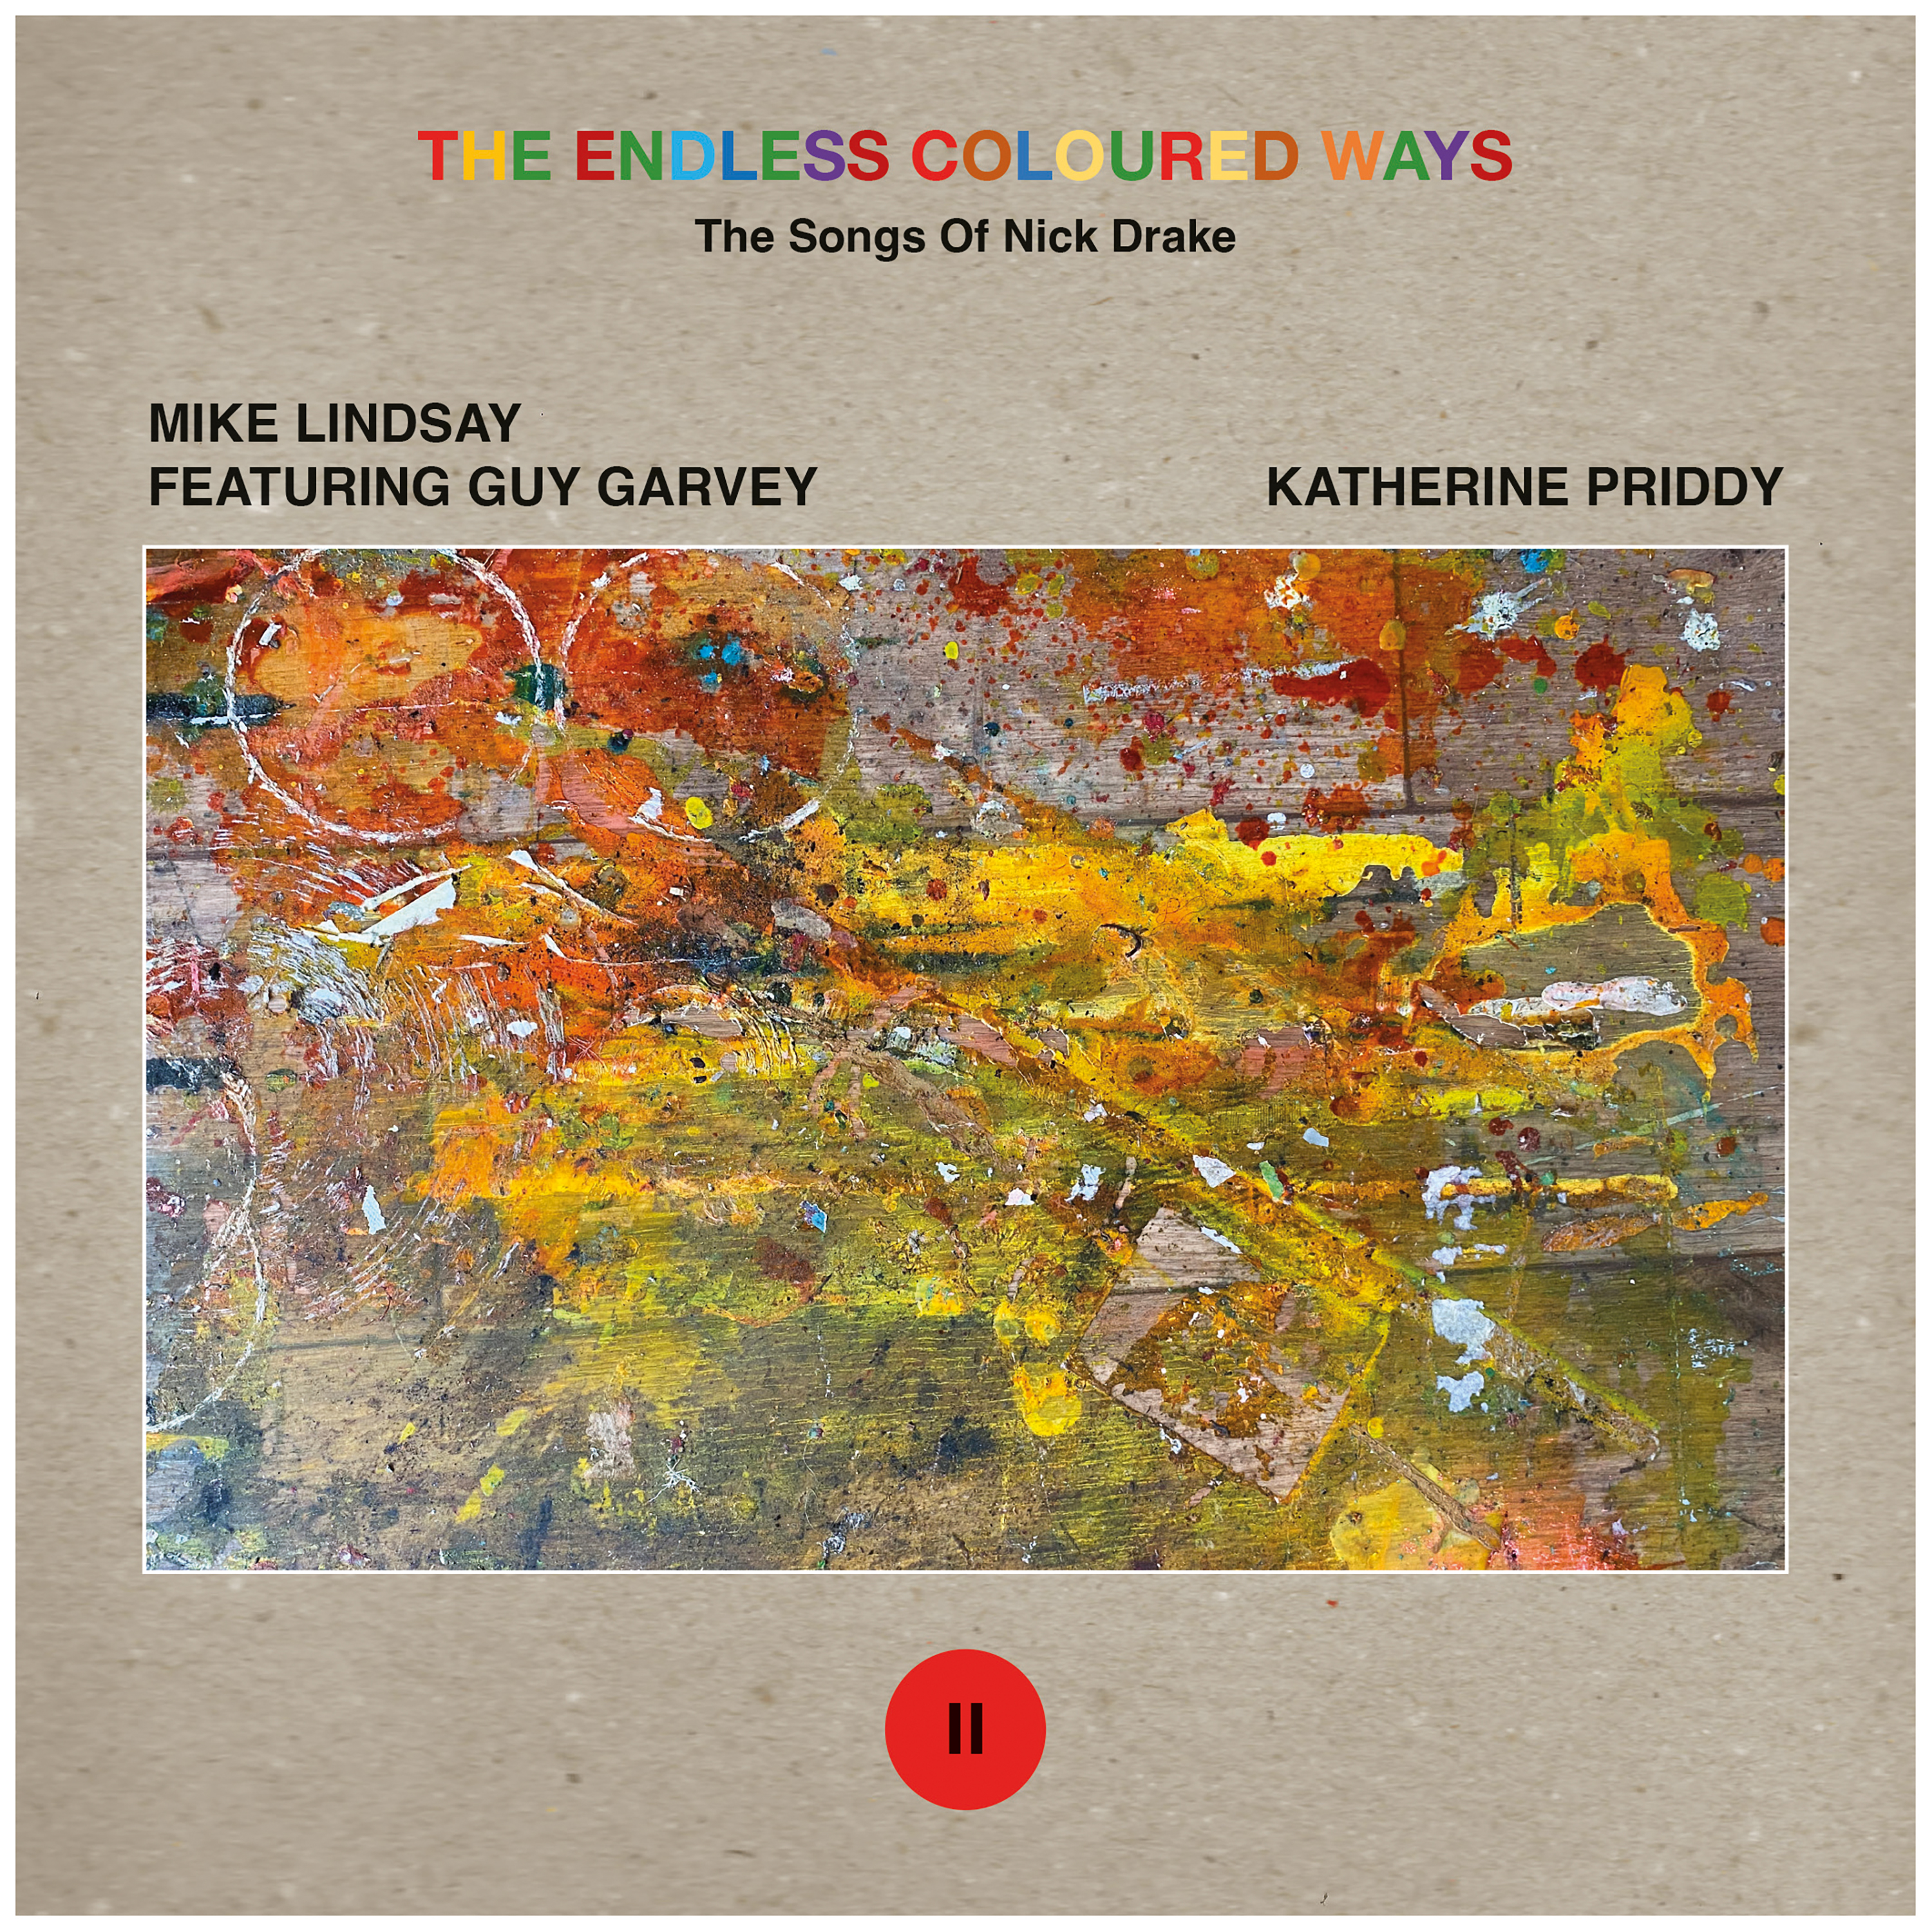 Mike Lindsay feat. Guy Garvey / Katherine Priddy - The Endless Coloured Ways: The Song